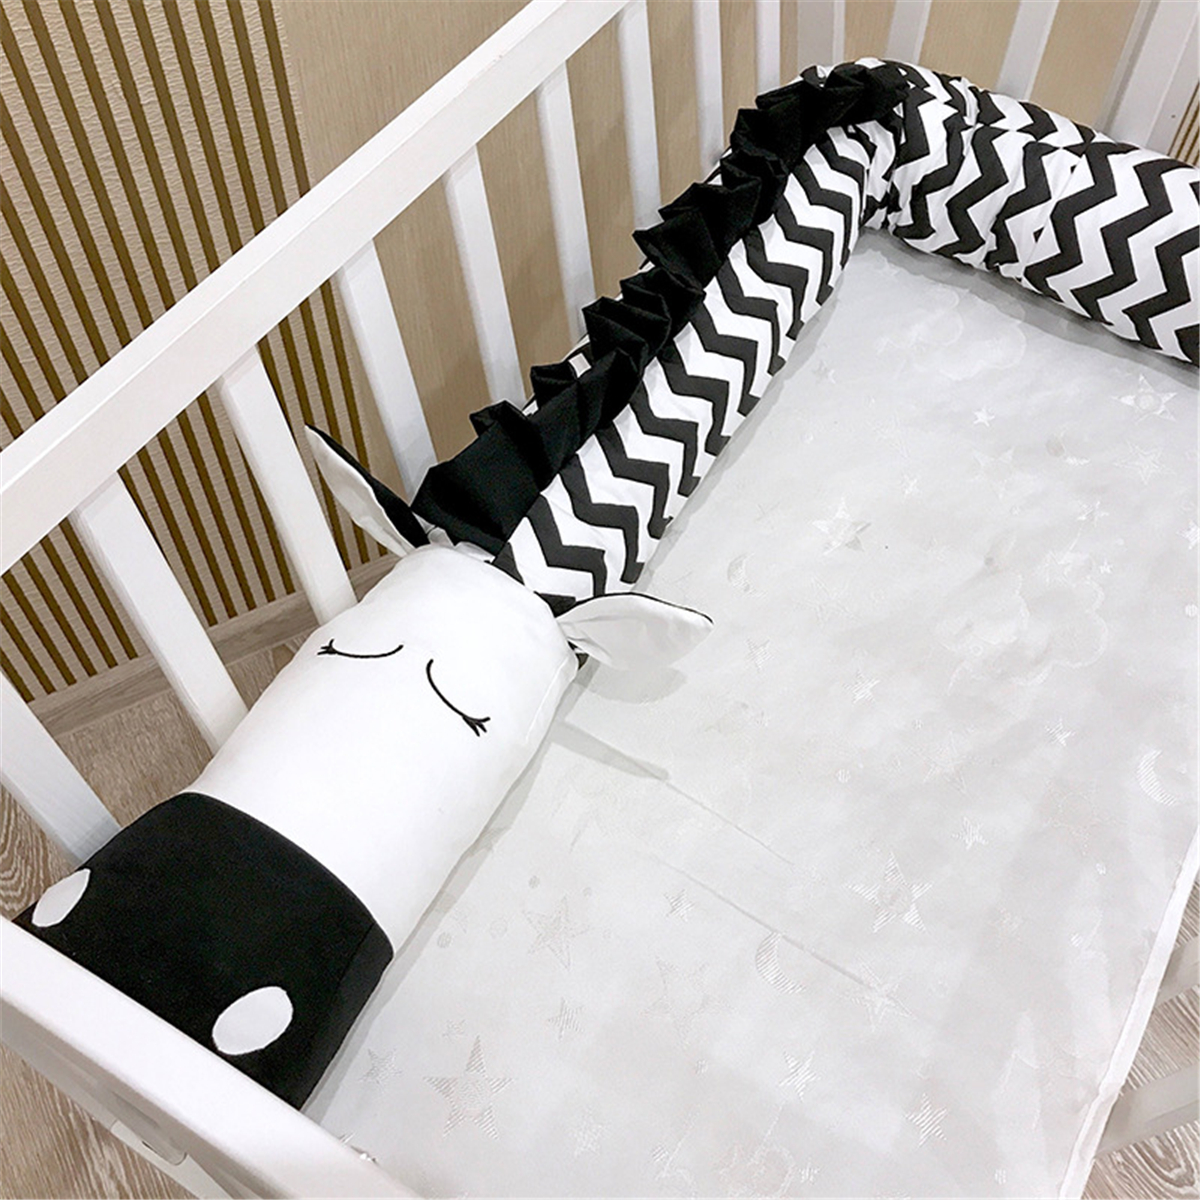 

Baby Infant Crocodile Zebra Shaped Pillow Cotton Cushion Kids Bed Crib Bumper Protector